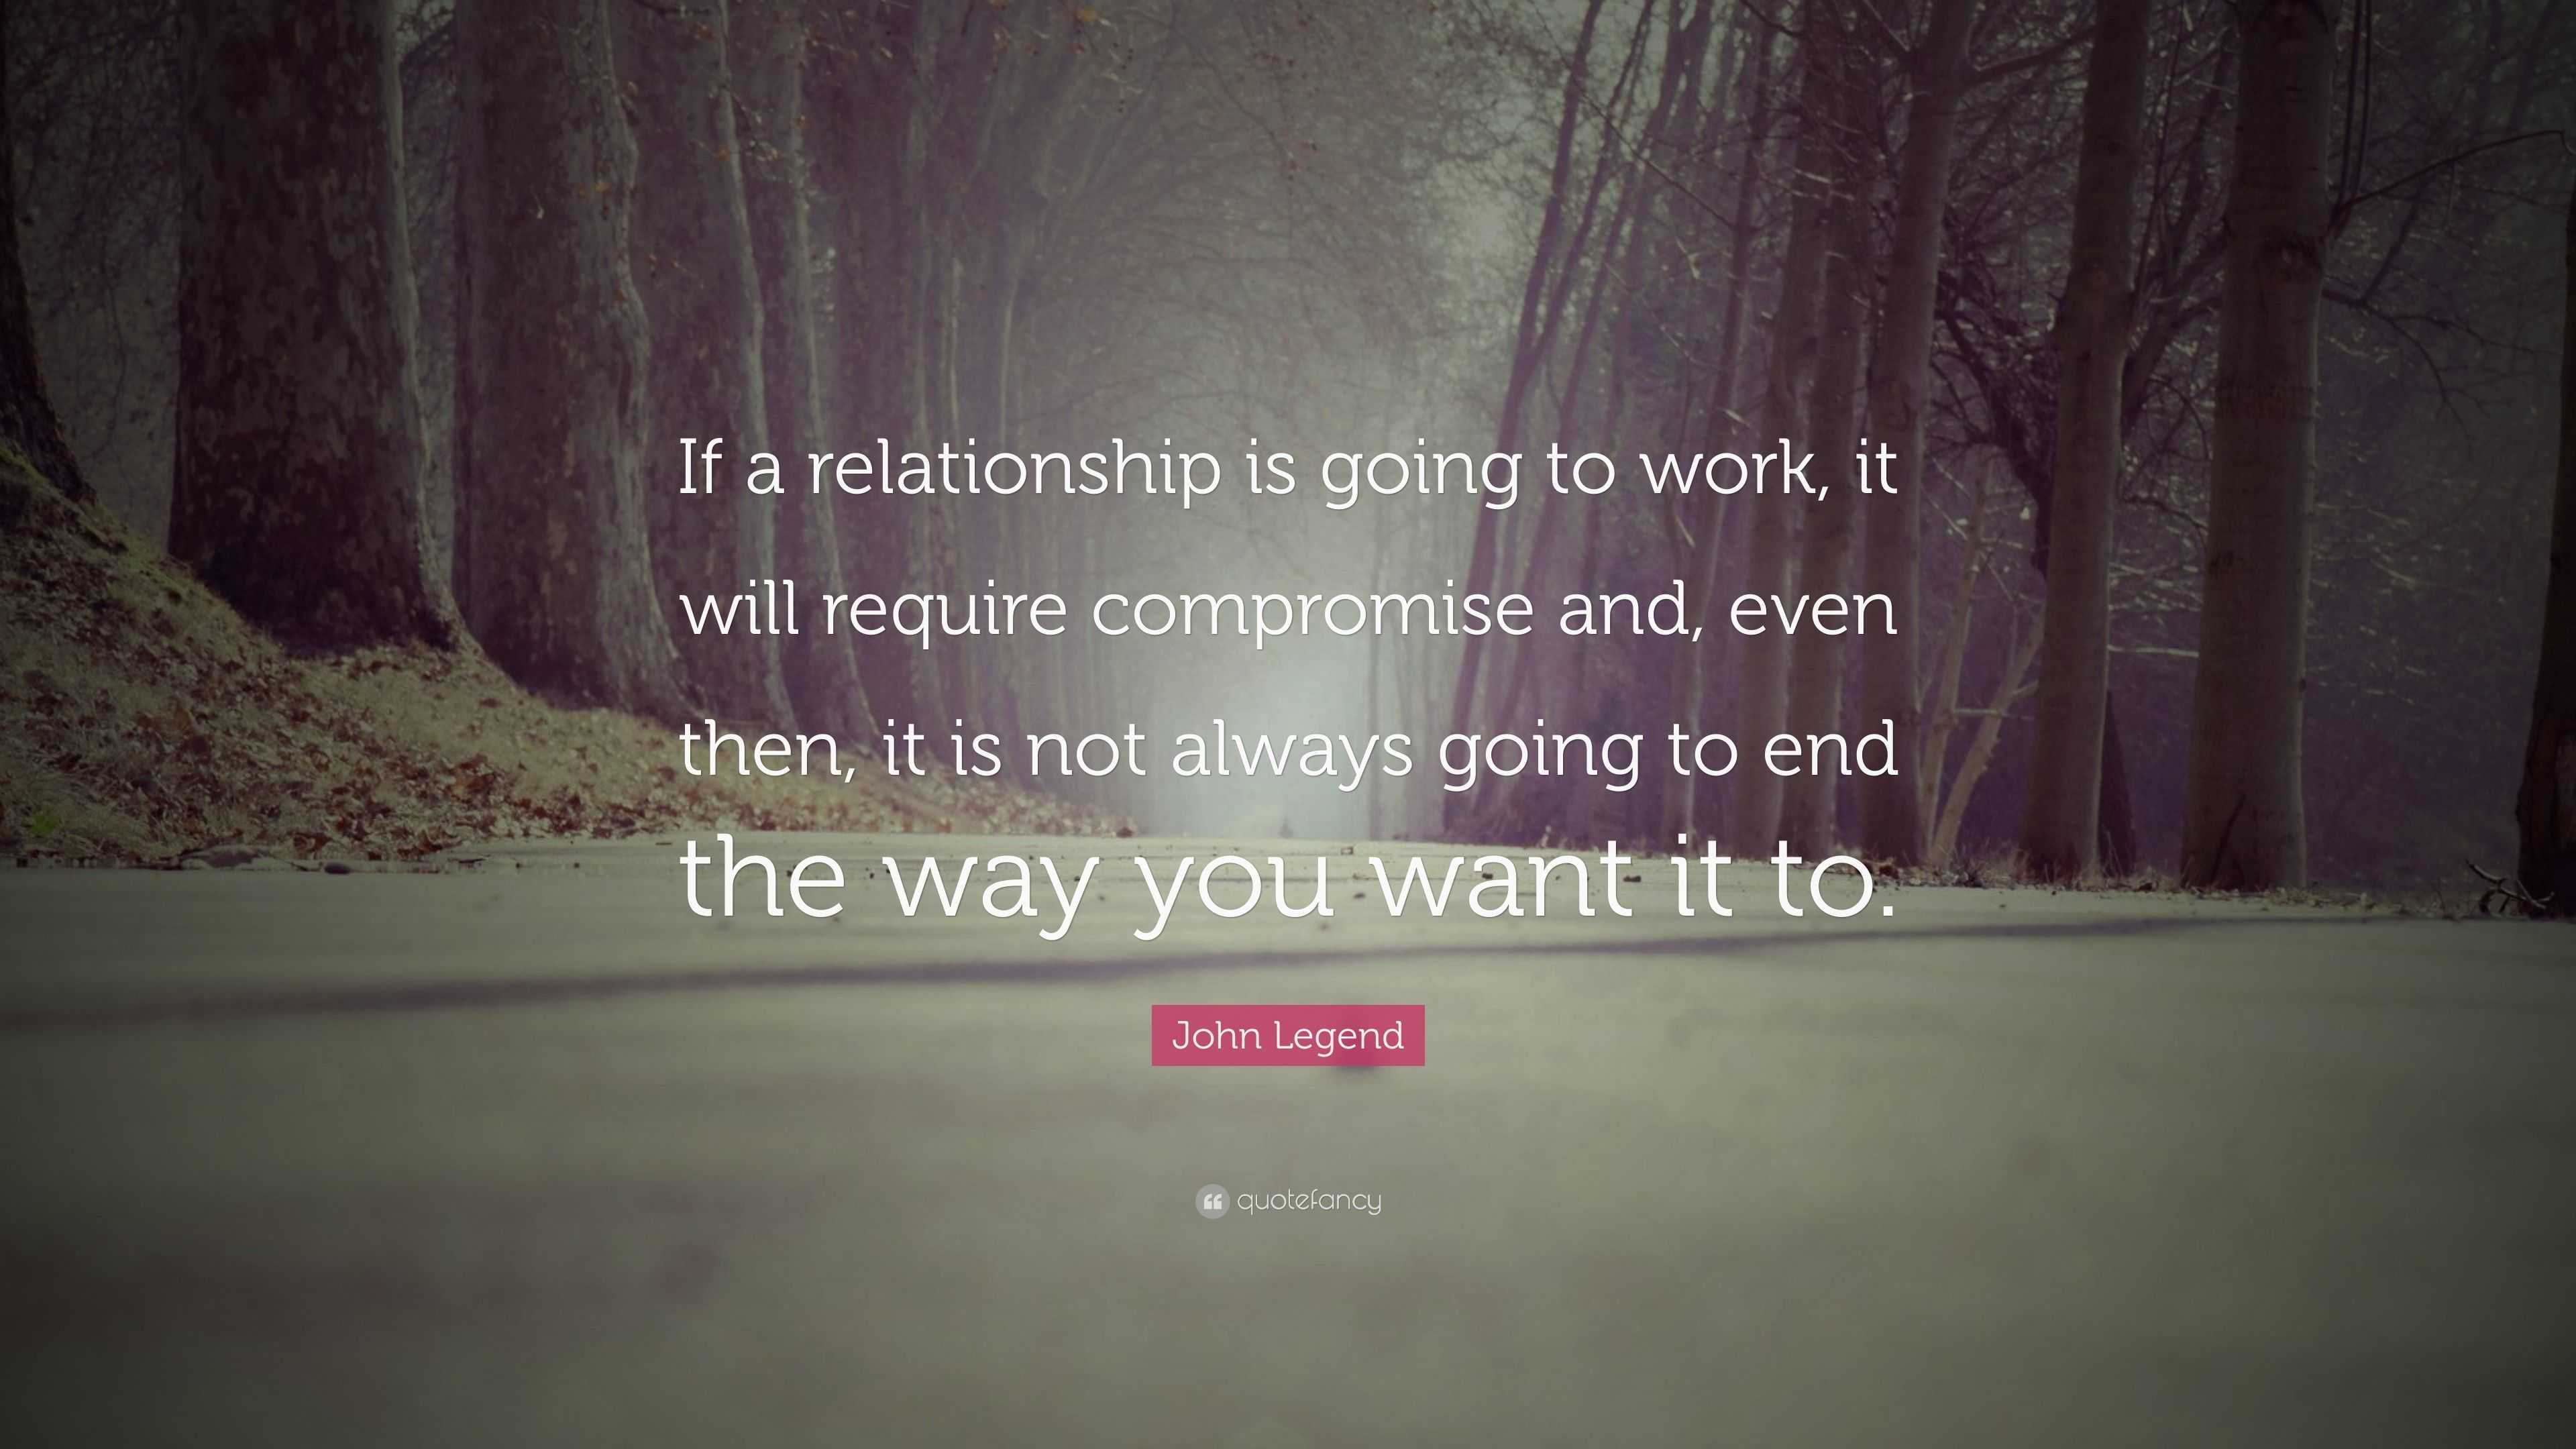 John Legend Quote: “If a relationship is going to work, it will require ...